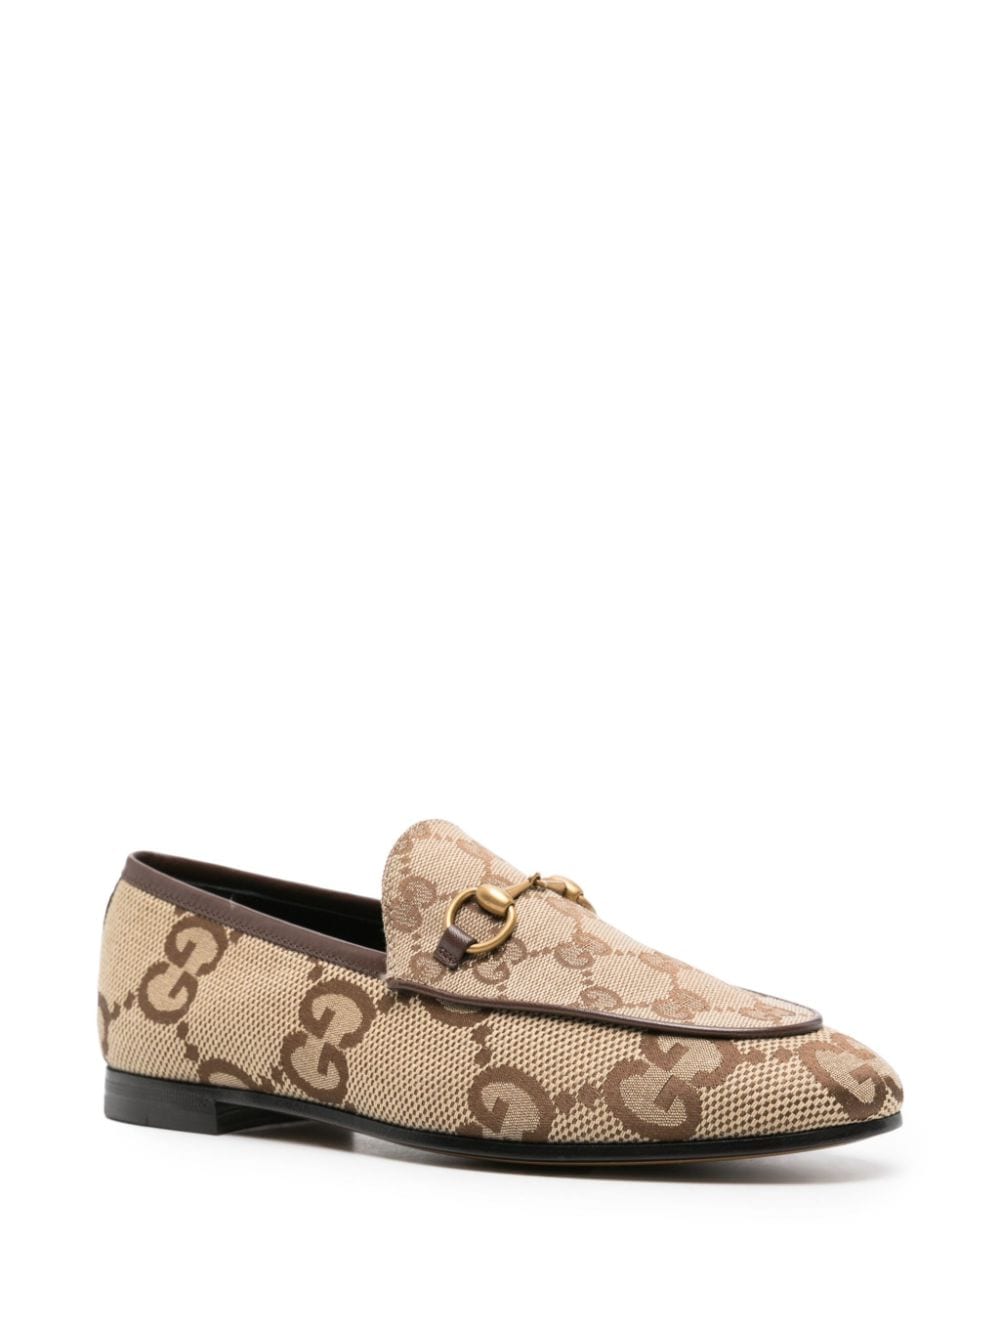 Image 2 of Gucci Jordaan panelled loafers